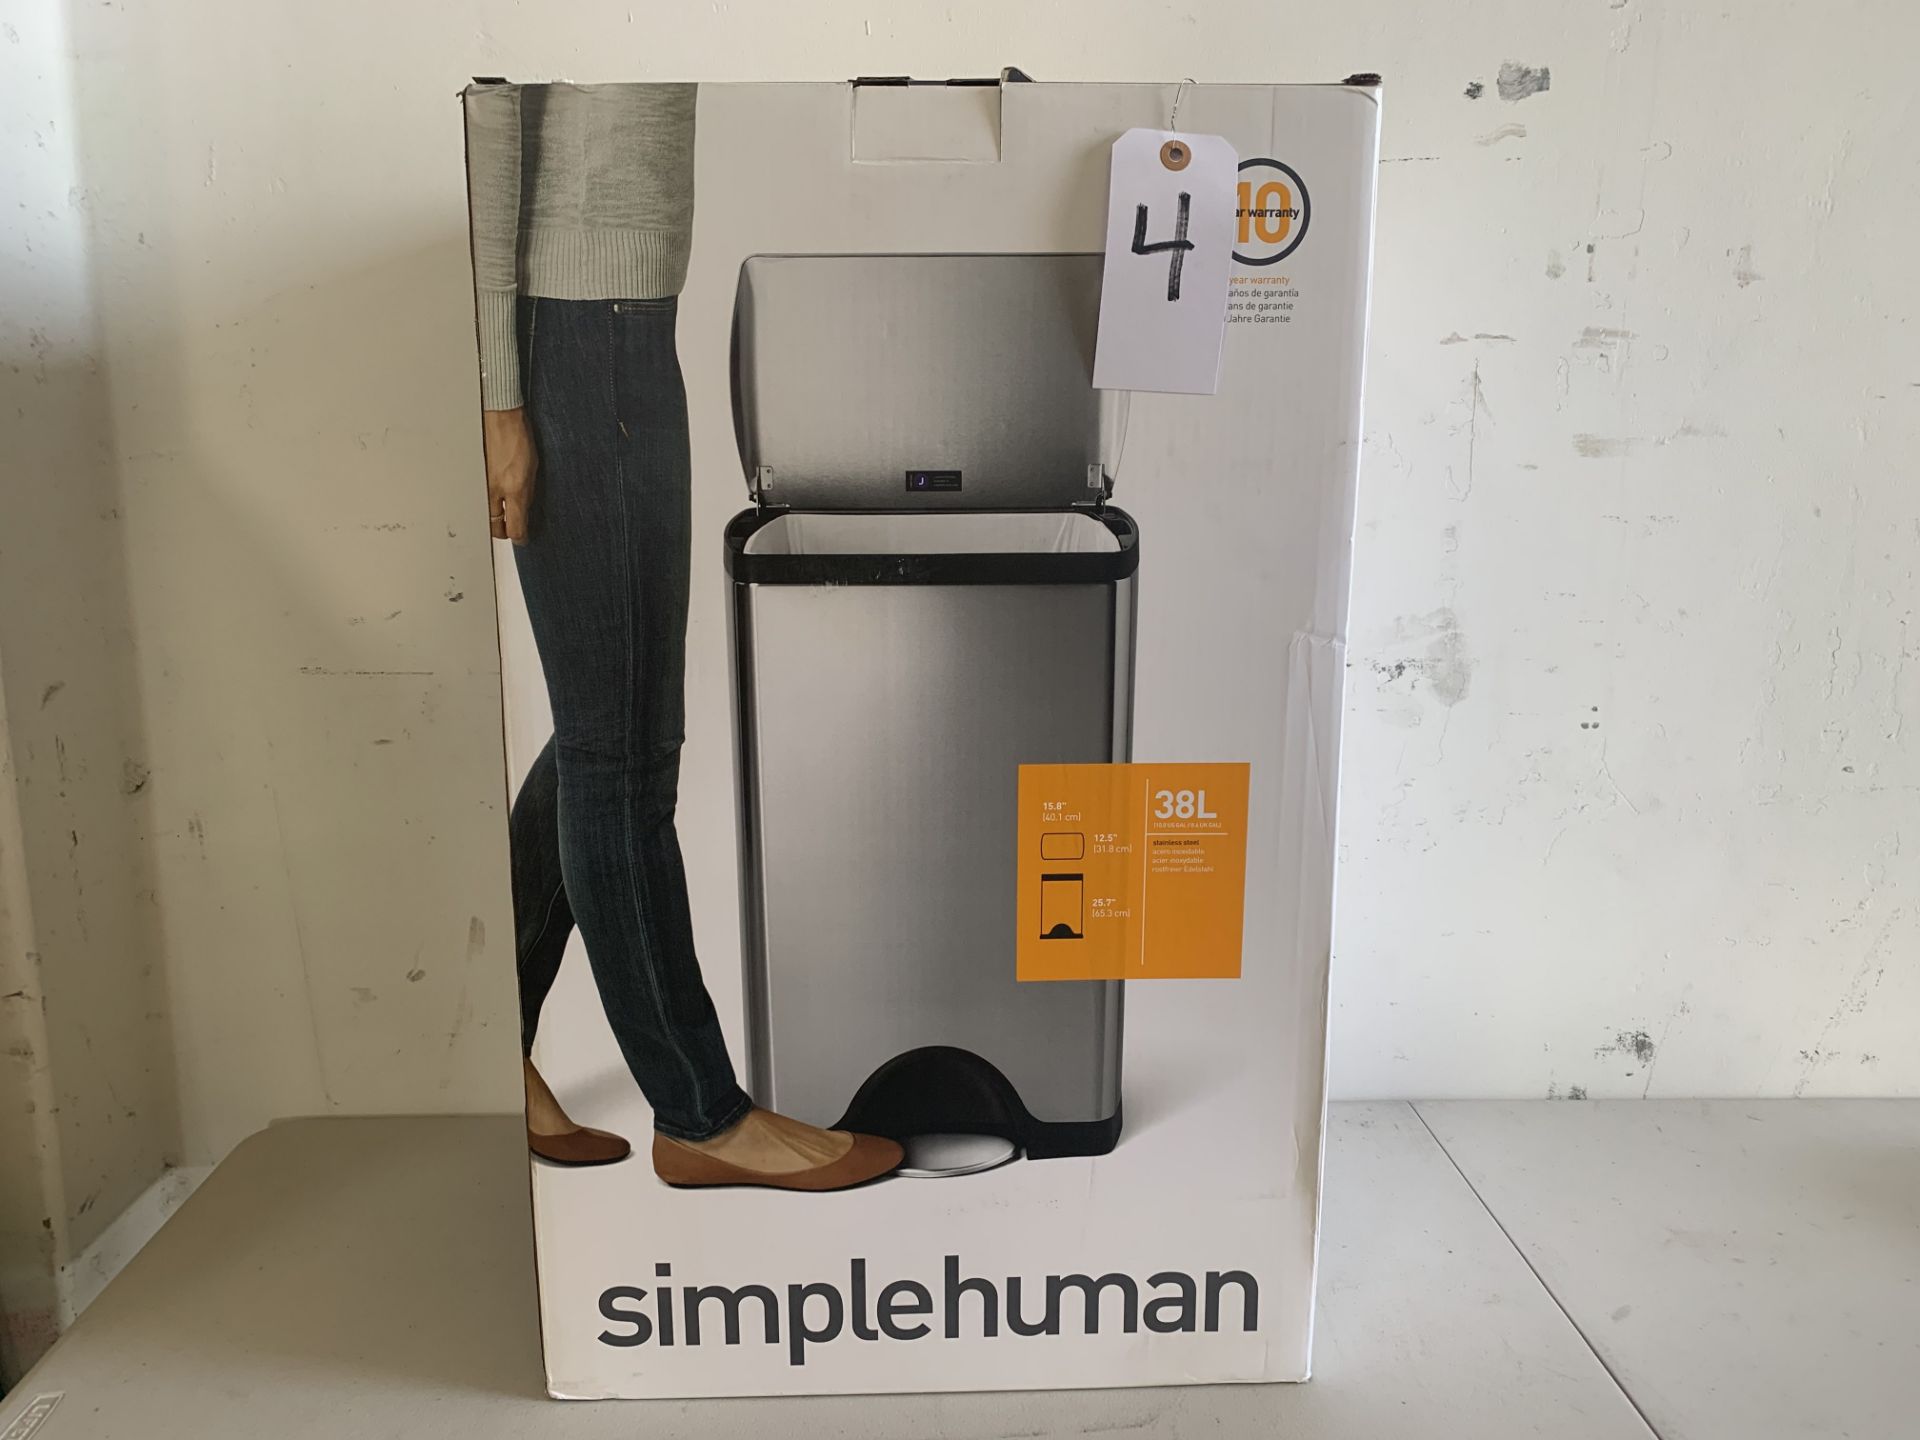 Simplehuman 38L Step Trash Can. Appears to be New - Image 3 of 3